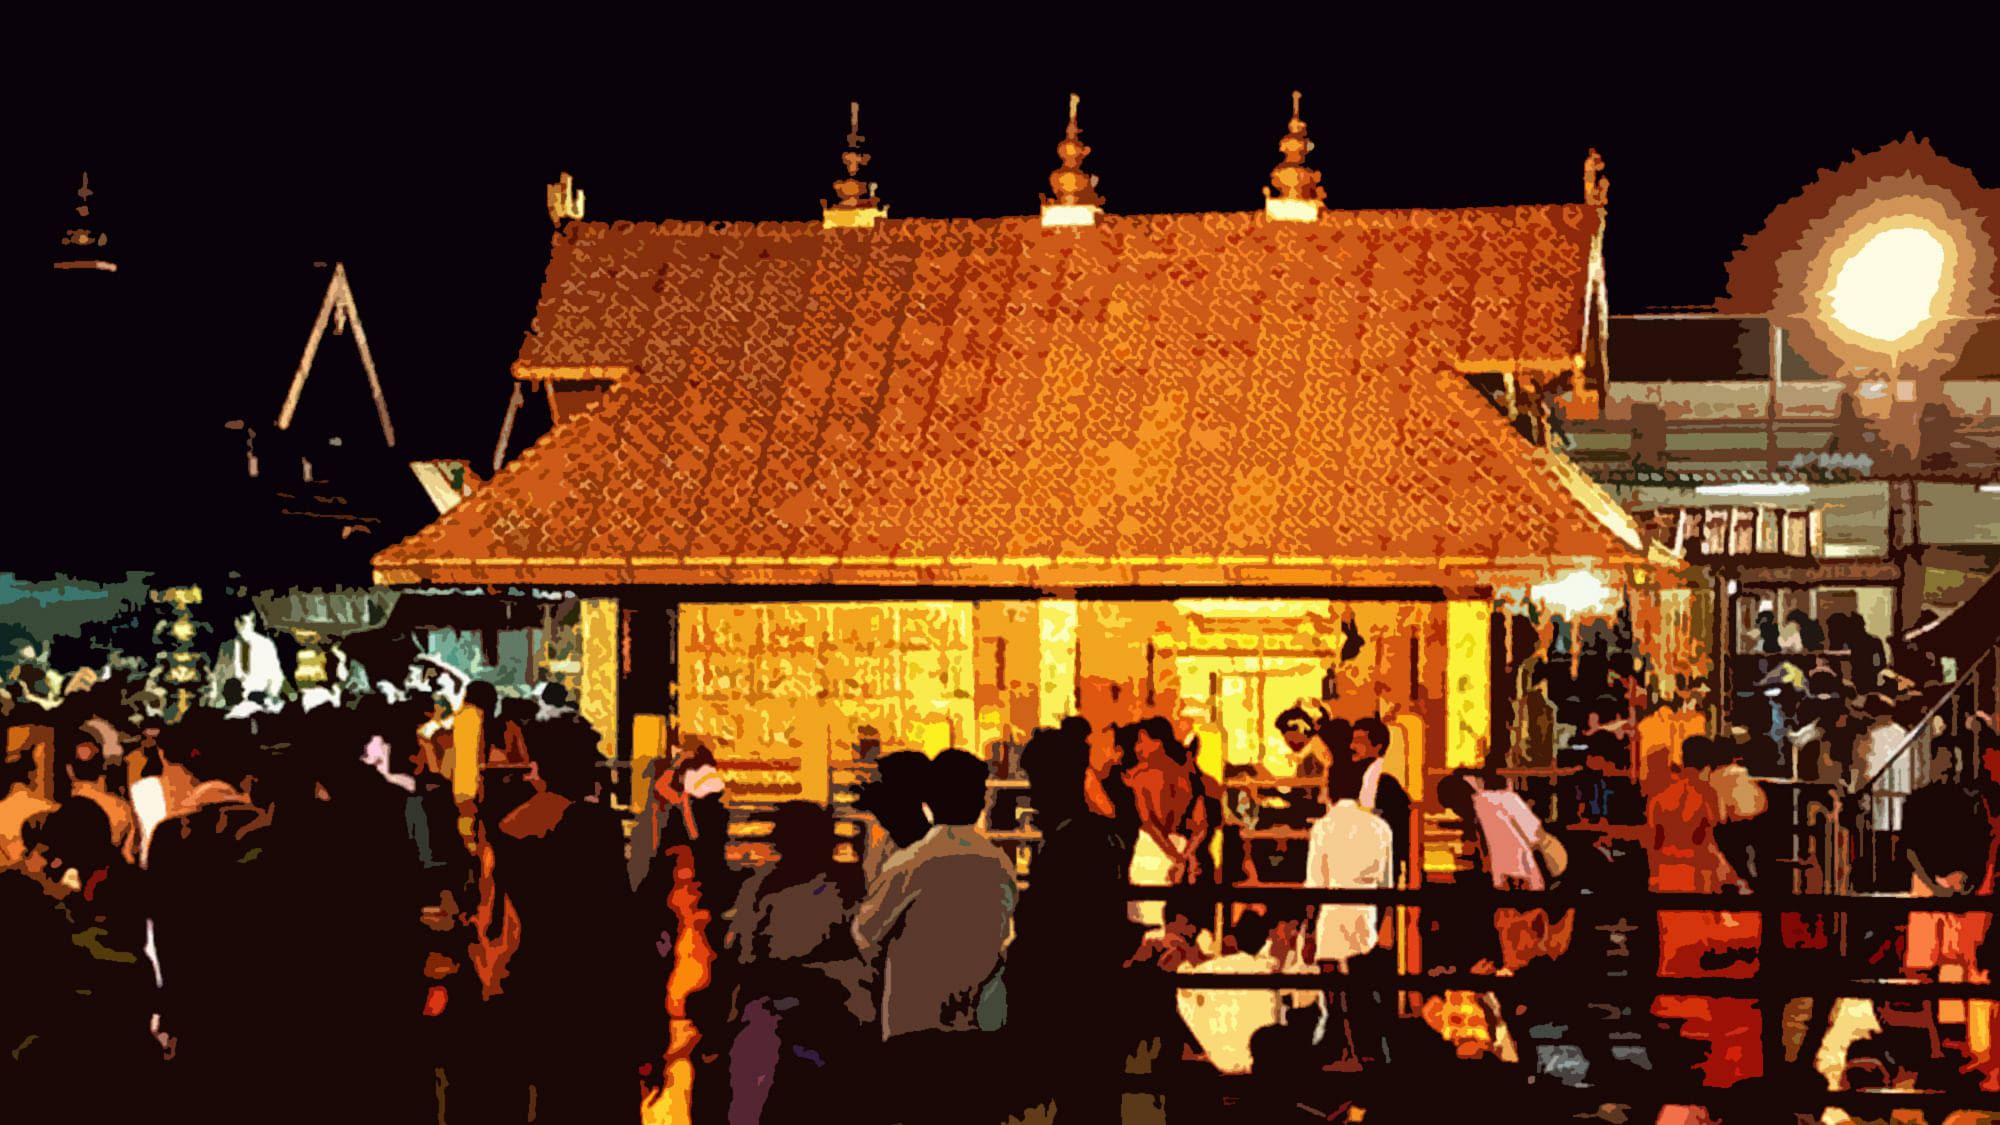 Sabarimala Temple, Kerala denies entry of women and girls between 10-50 years into the temple. Image used for representational purposes.